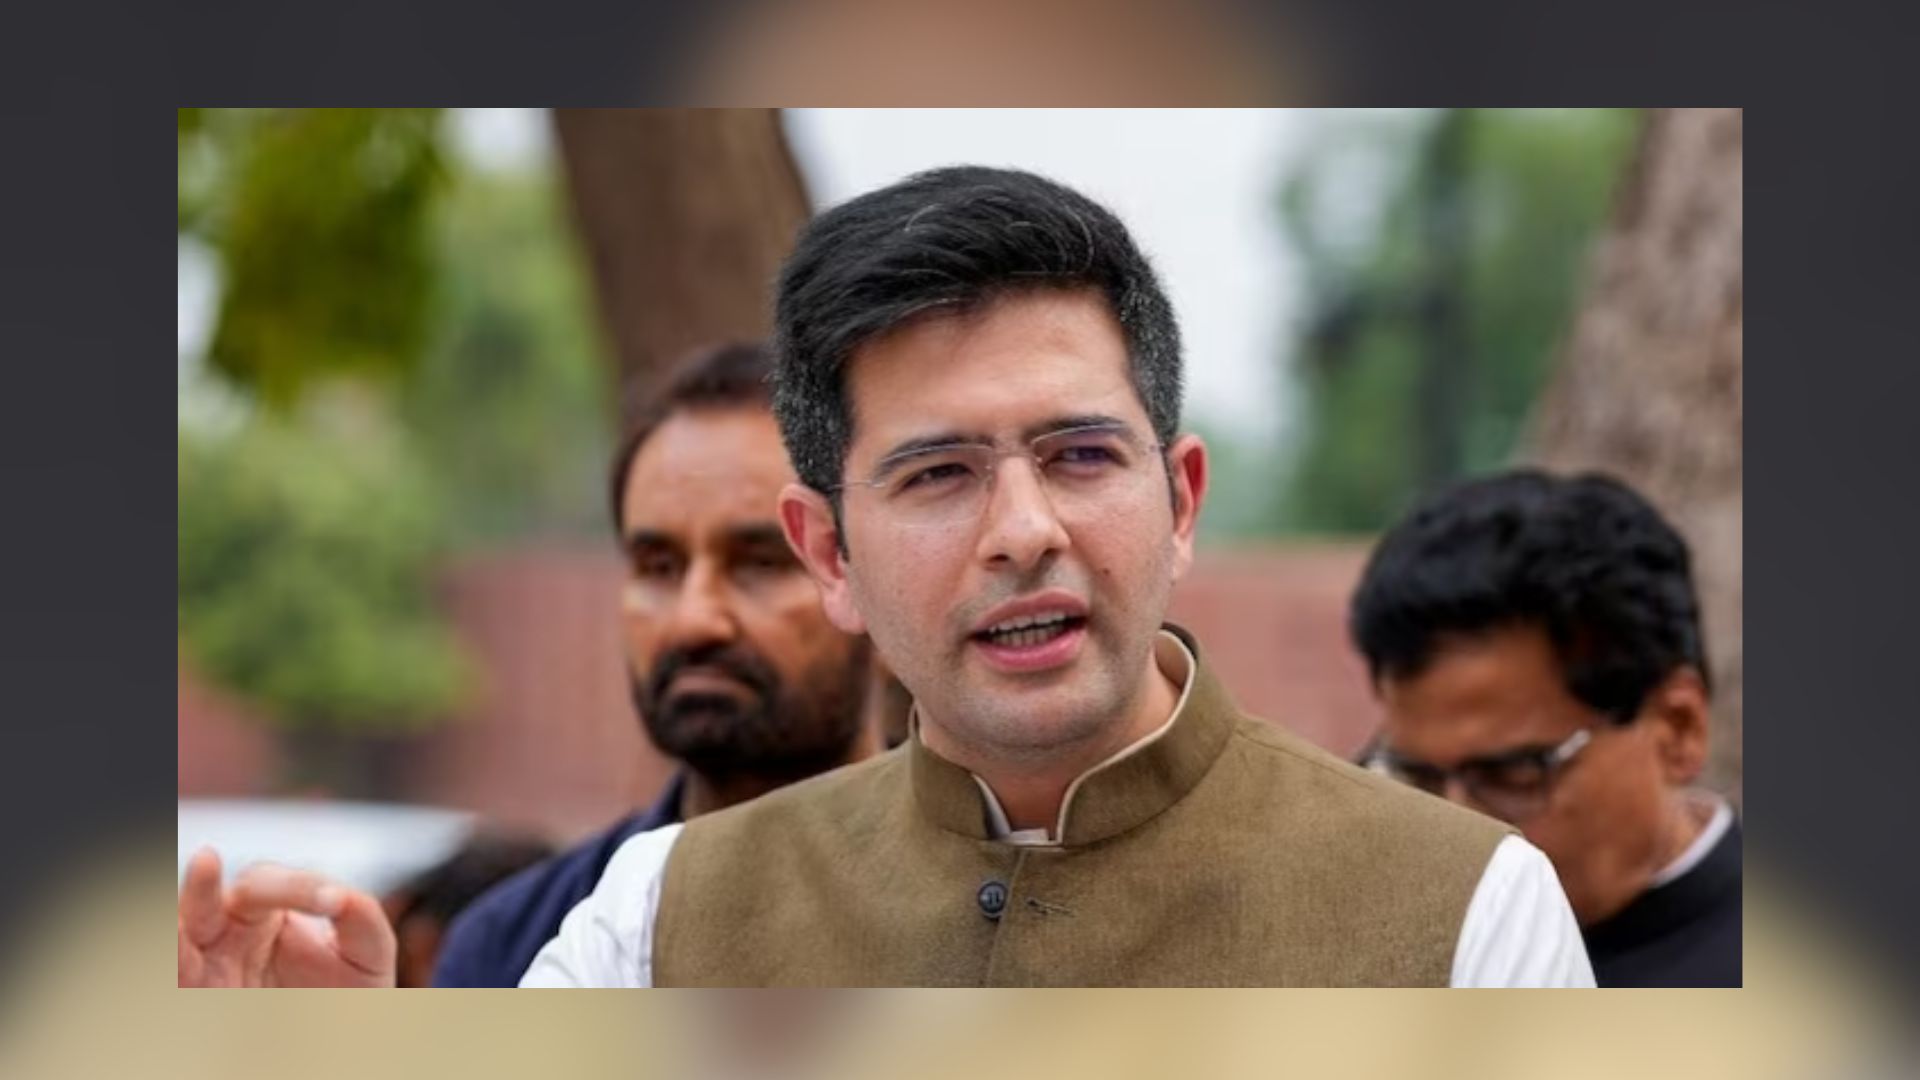 AAP Leader Raghav Chadha Criticizes Arrest of Arvind Kejriwal, Nationwide Protests Announced